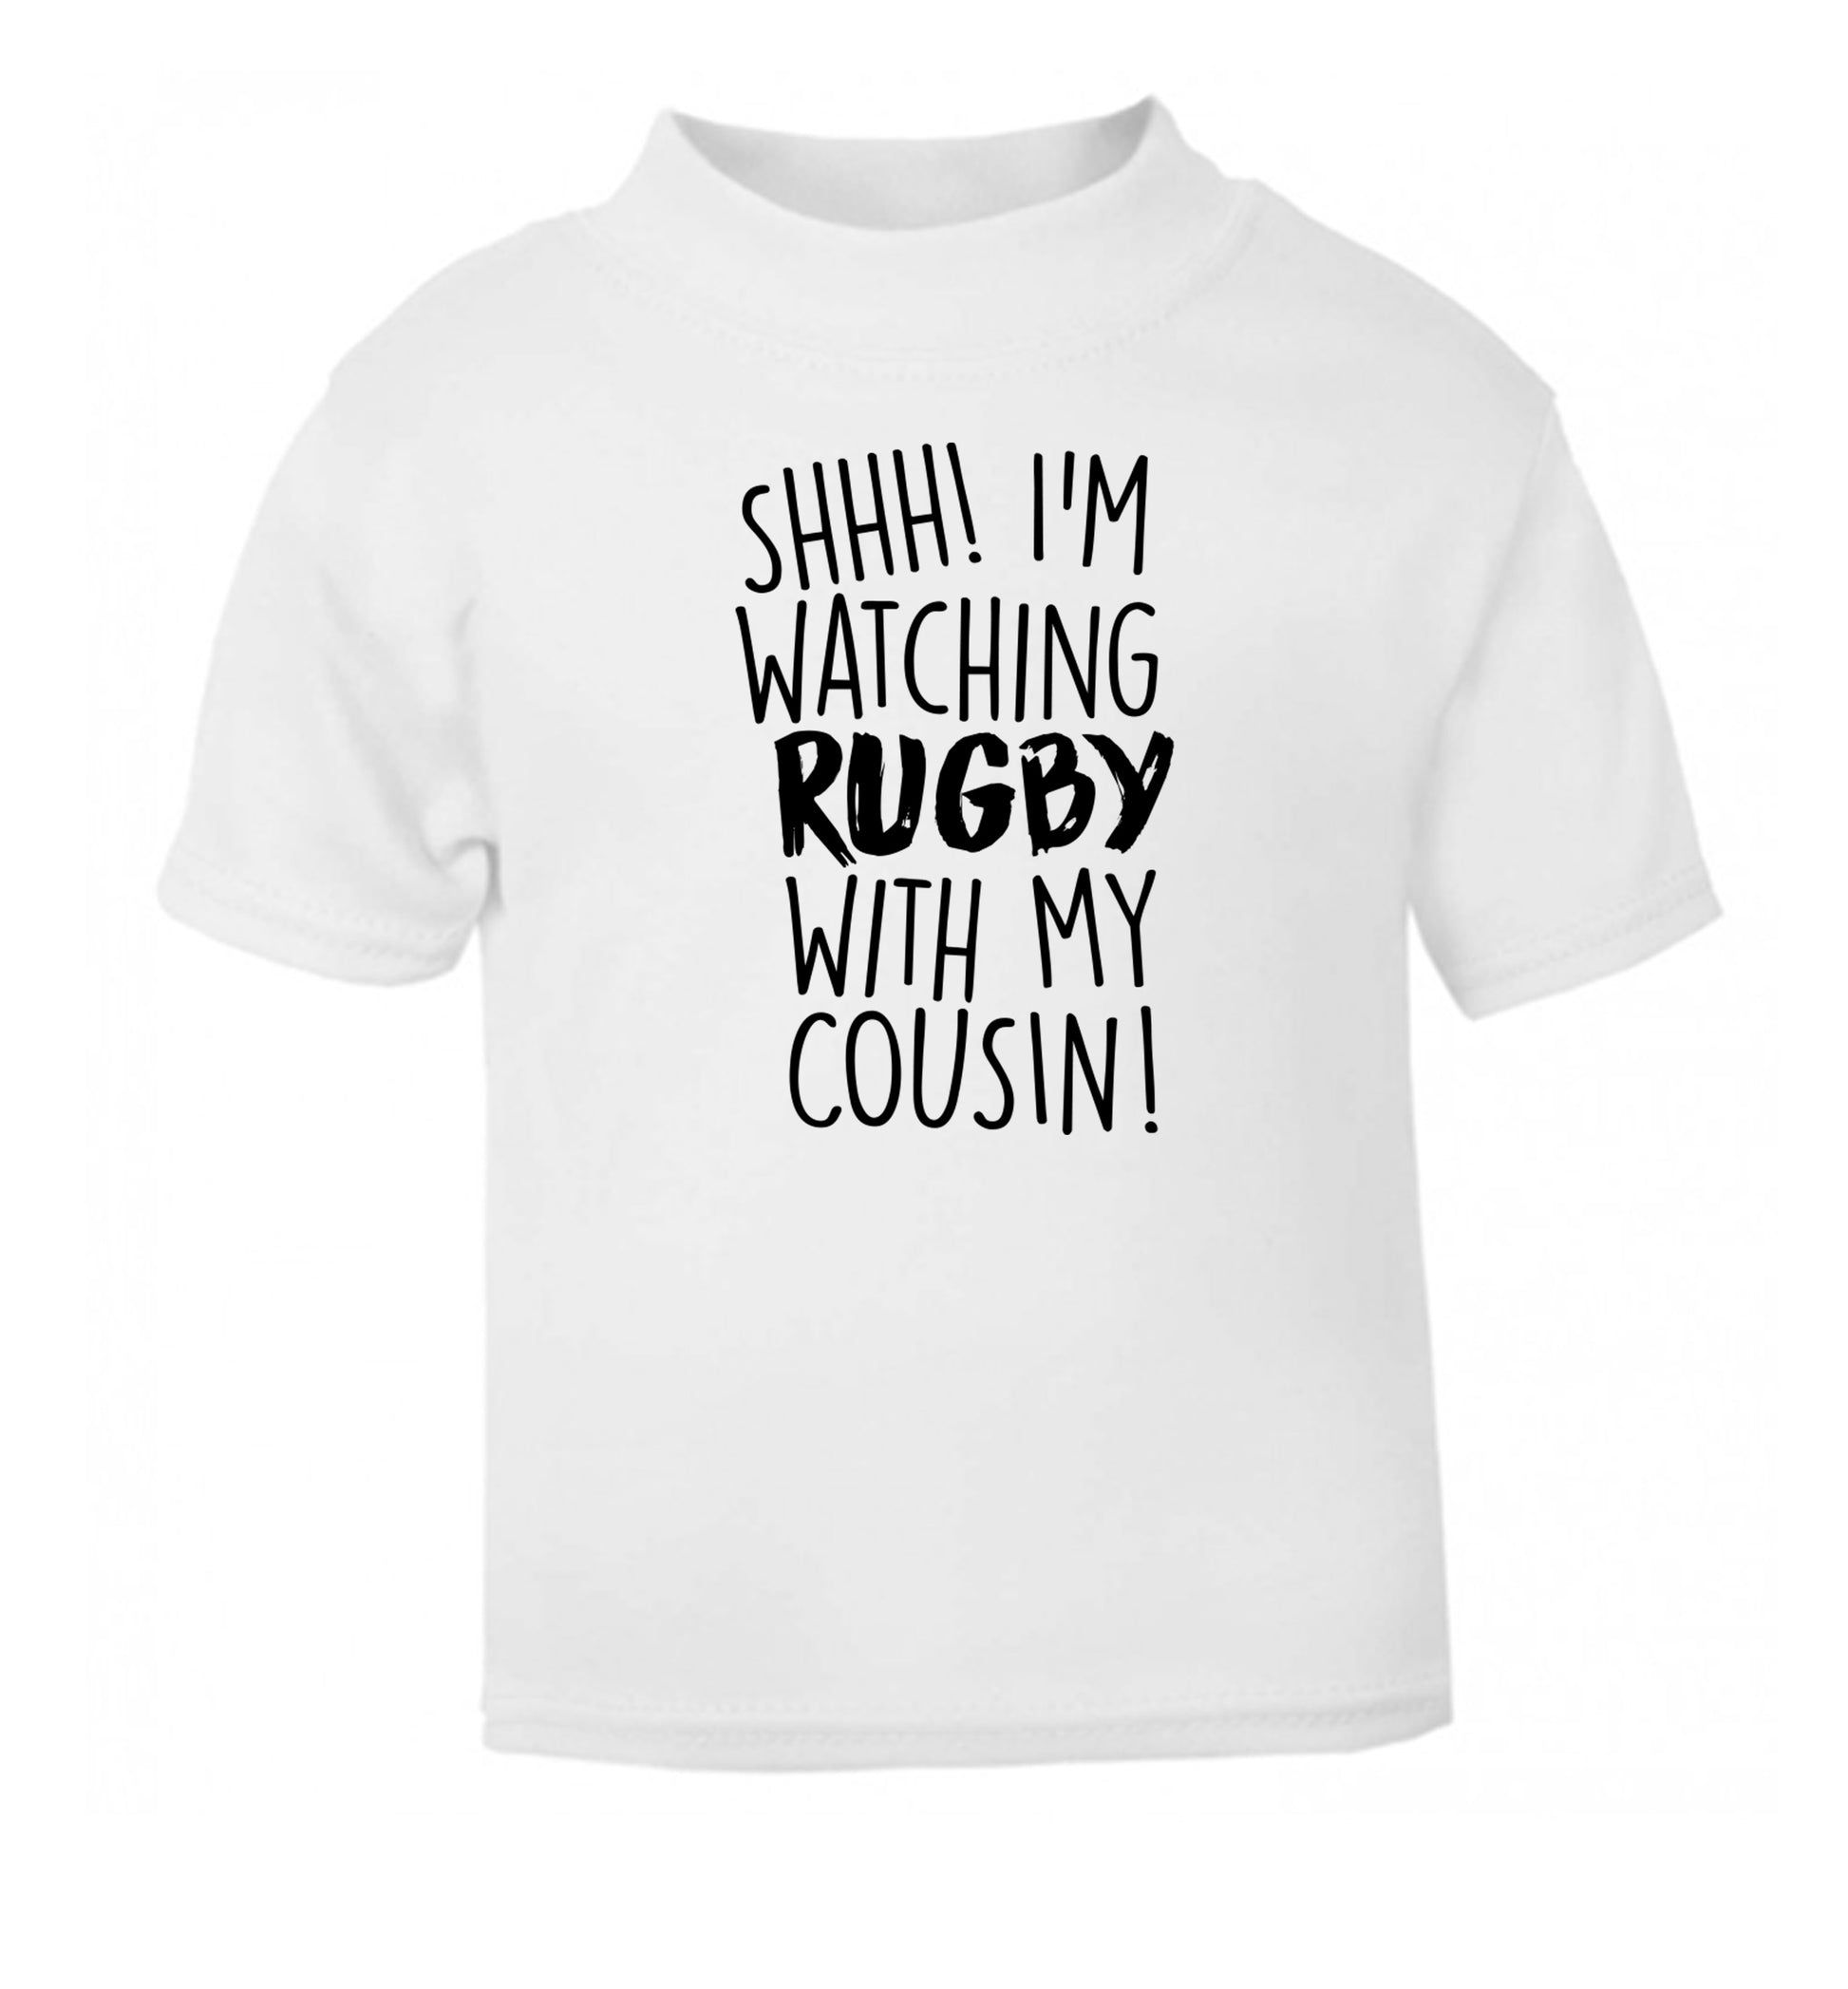 Shhh I'm watching rugby with my cousin white Baby Toddler Tshirt 2 Years